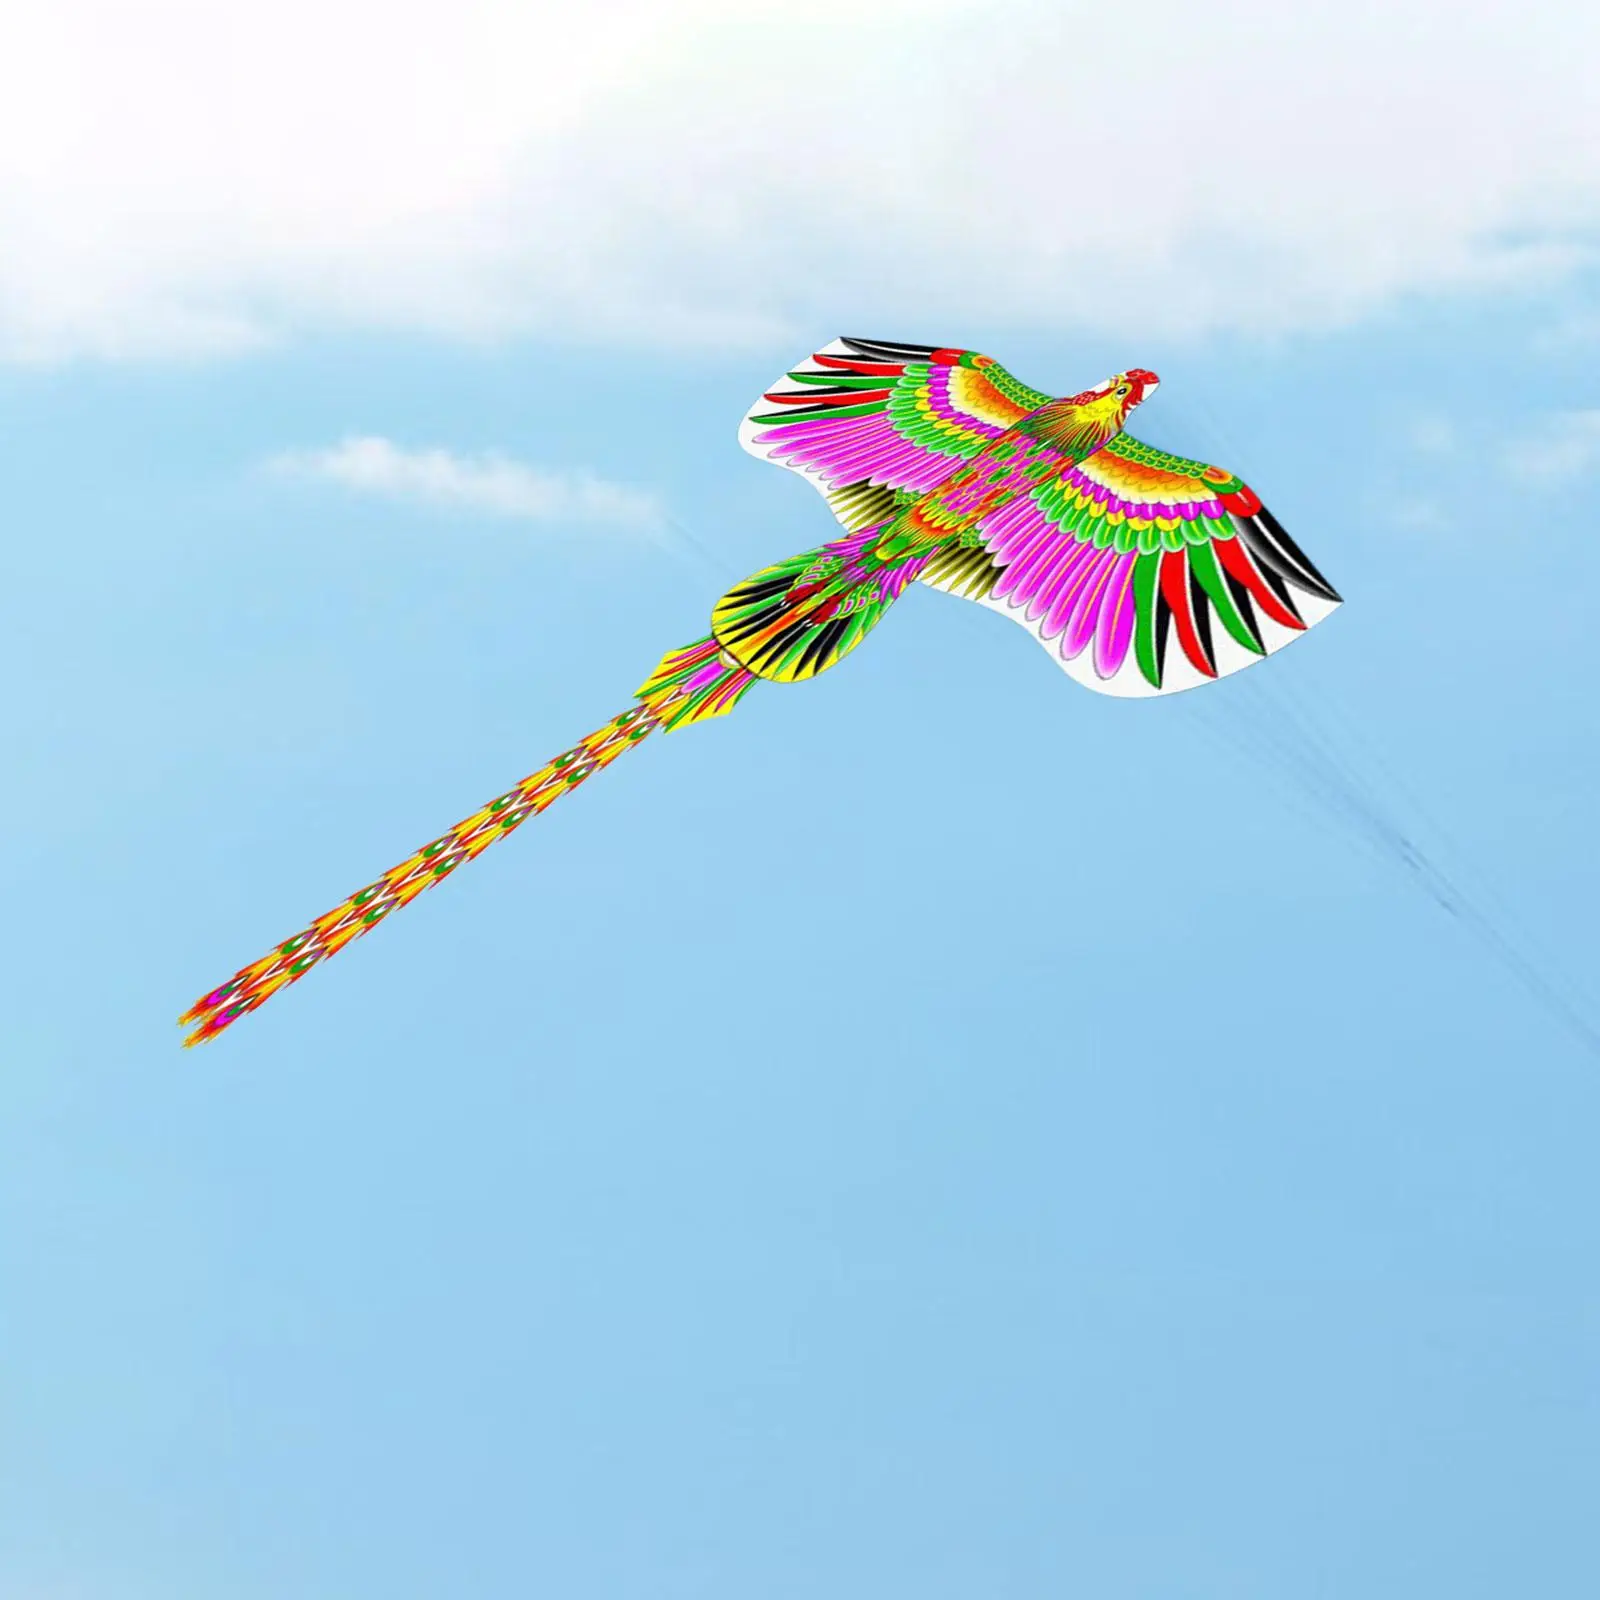 

Huge Kite for Adults Single Line Colorful with Long Tail Large Giant Kites for Park Outdoor Activities Backyard Beach